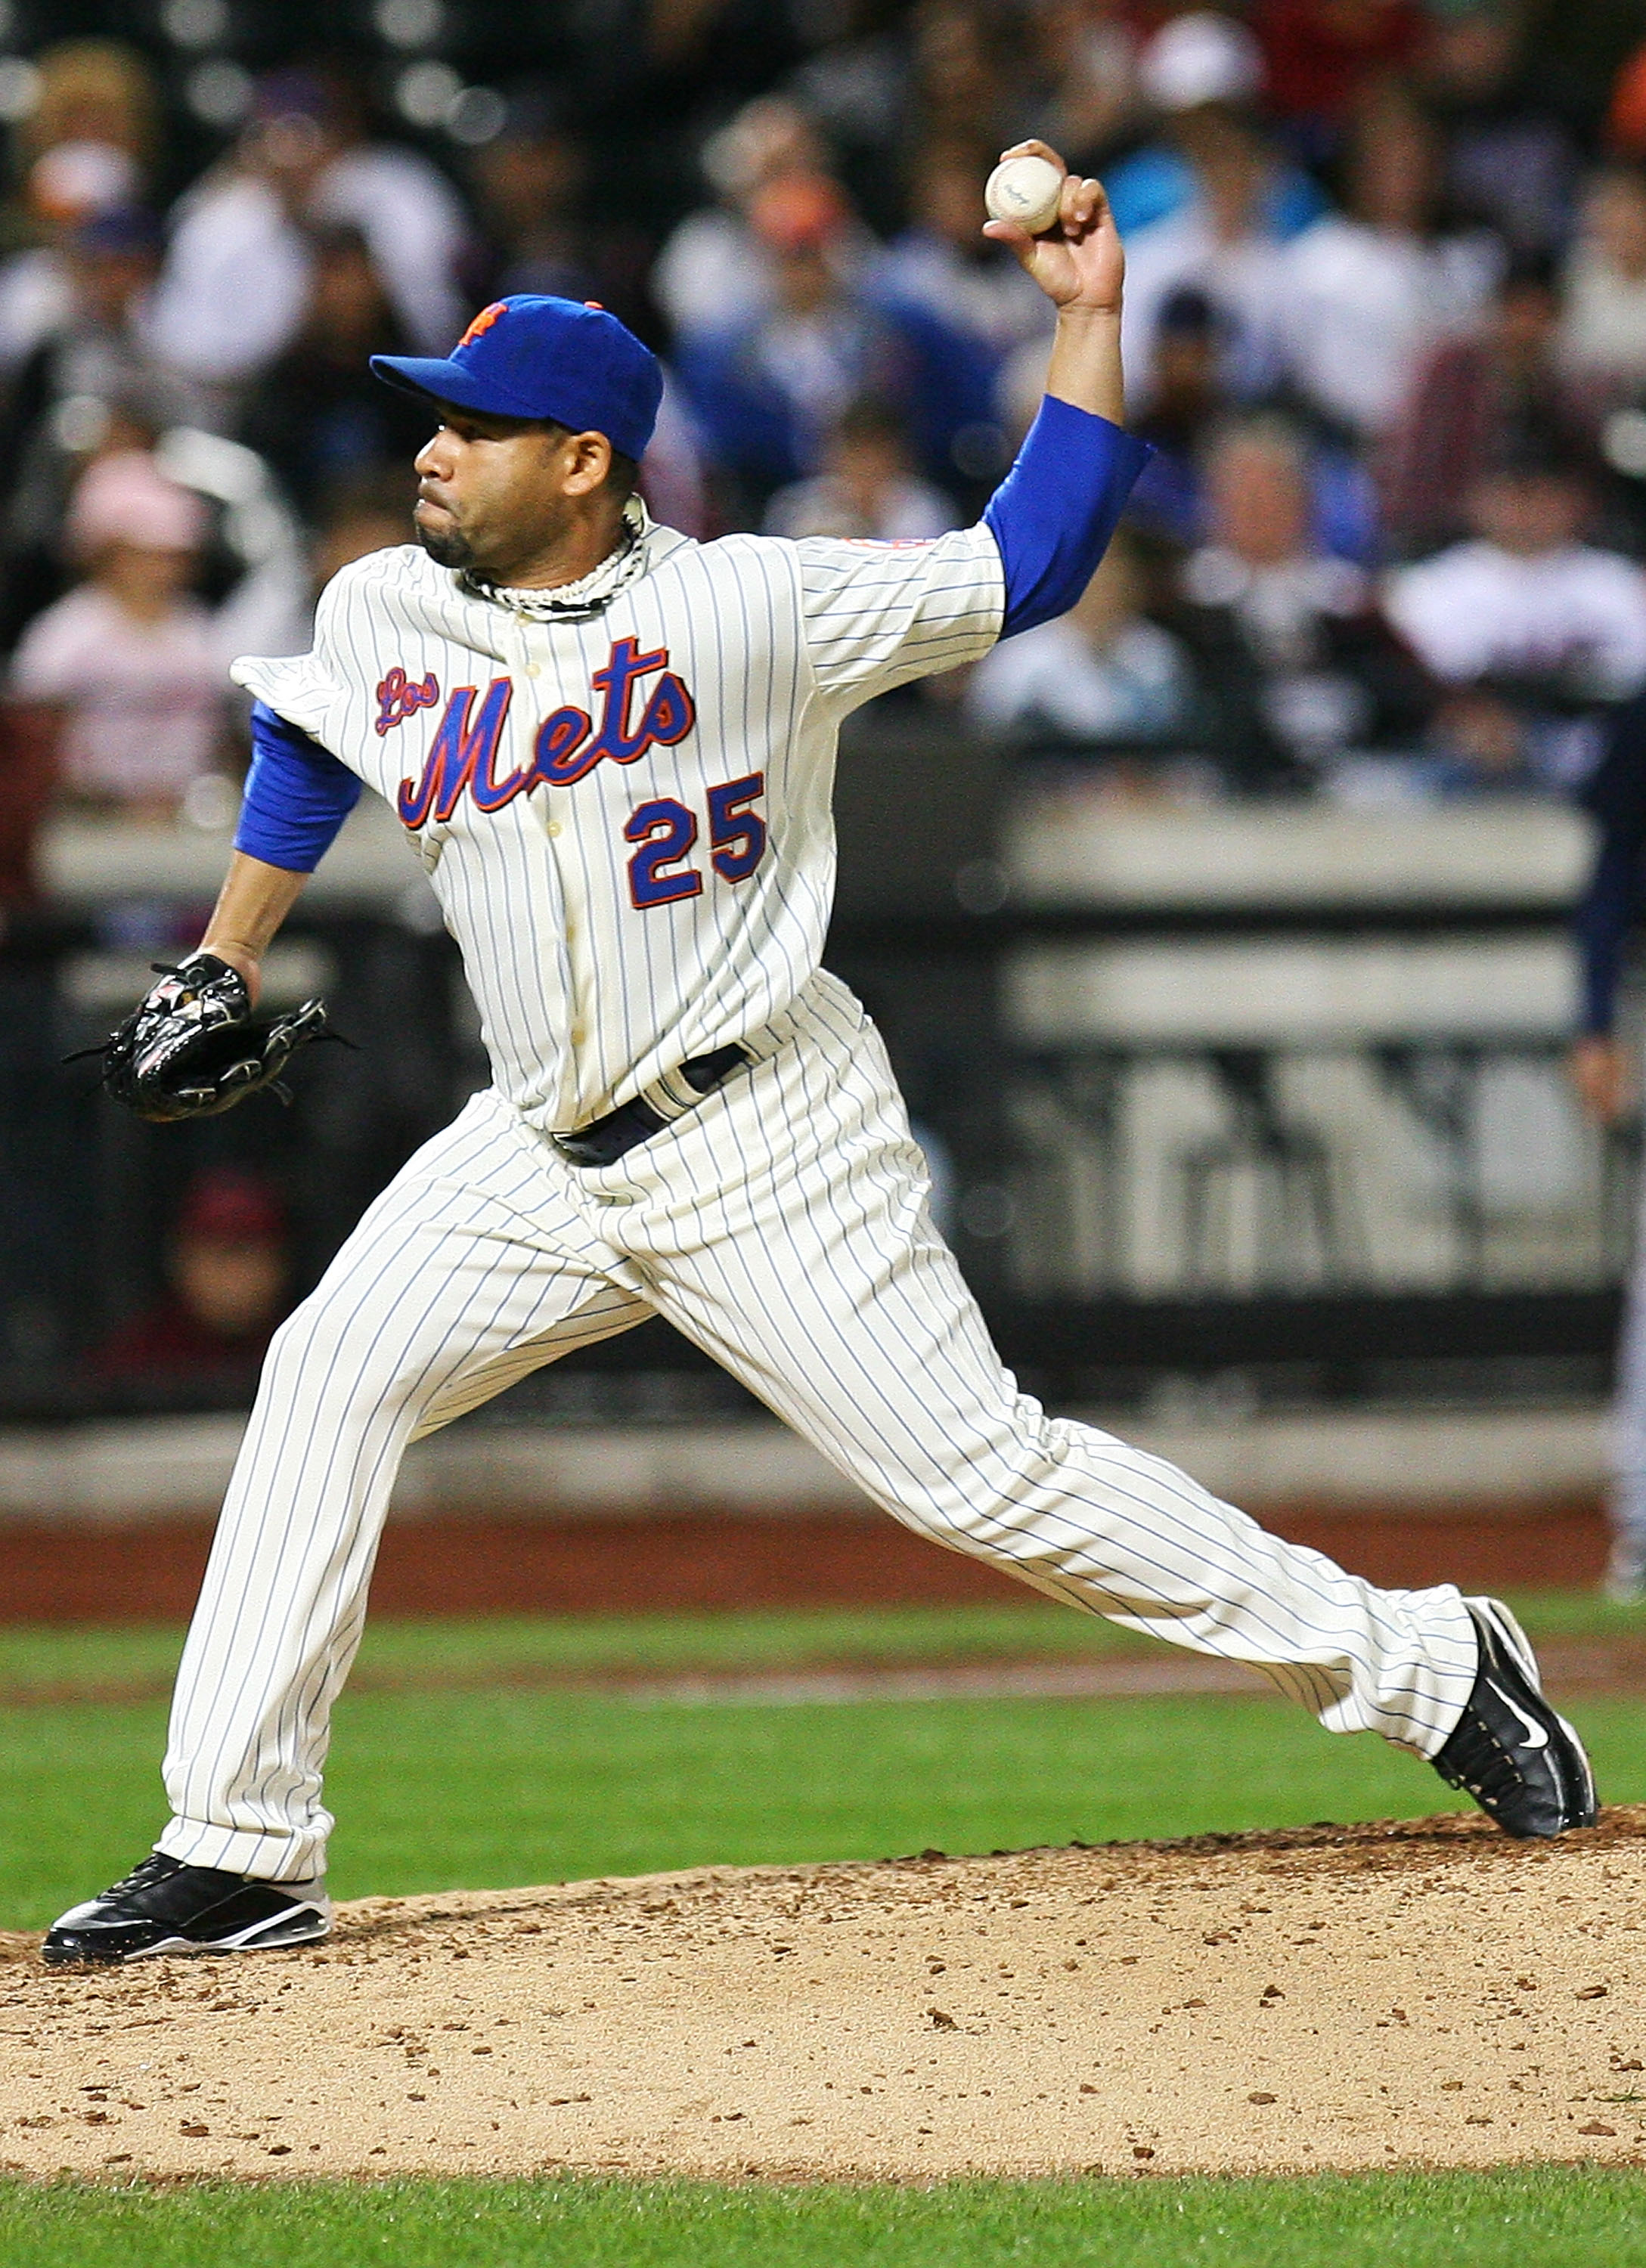 NEW YORK - SEPTEMBER 17:  Pedro Feliciano #25 of the New York Mets pitches against the Atlanta Braves on September 17, 2010 at Citi Field in the Flushing neighborhood of the Queens borough of New York City. The Braves beat the Mets 6 - 4.  (Photo by Andre